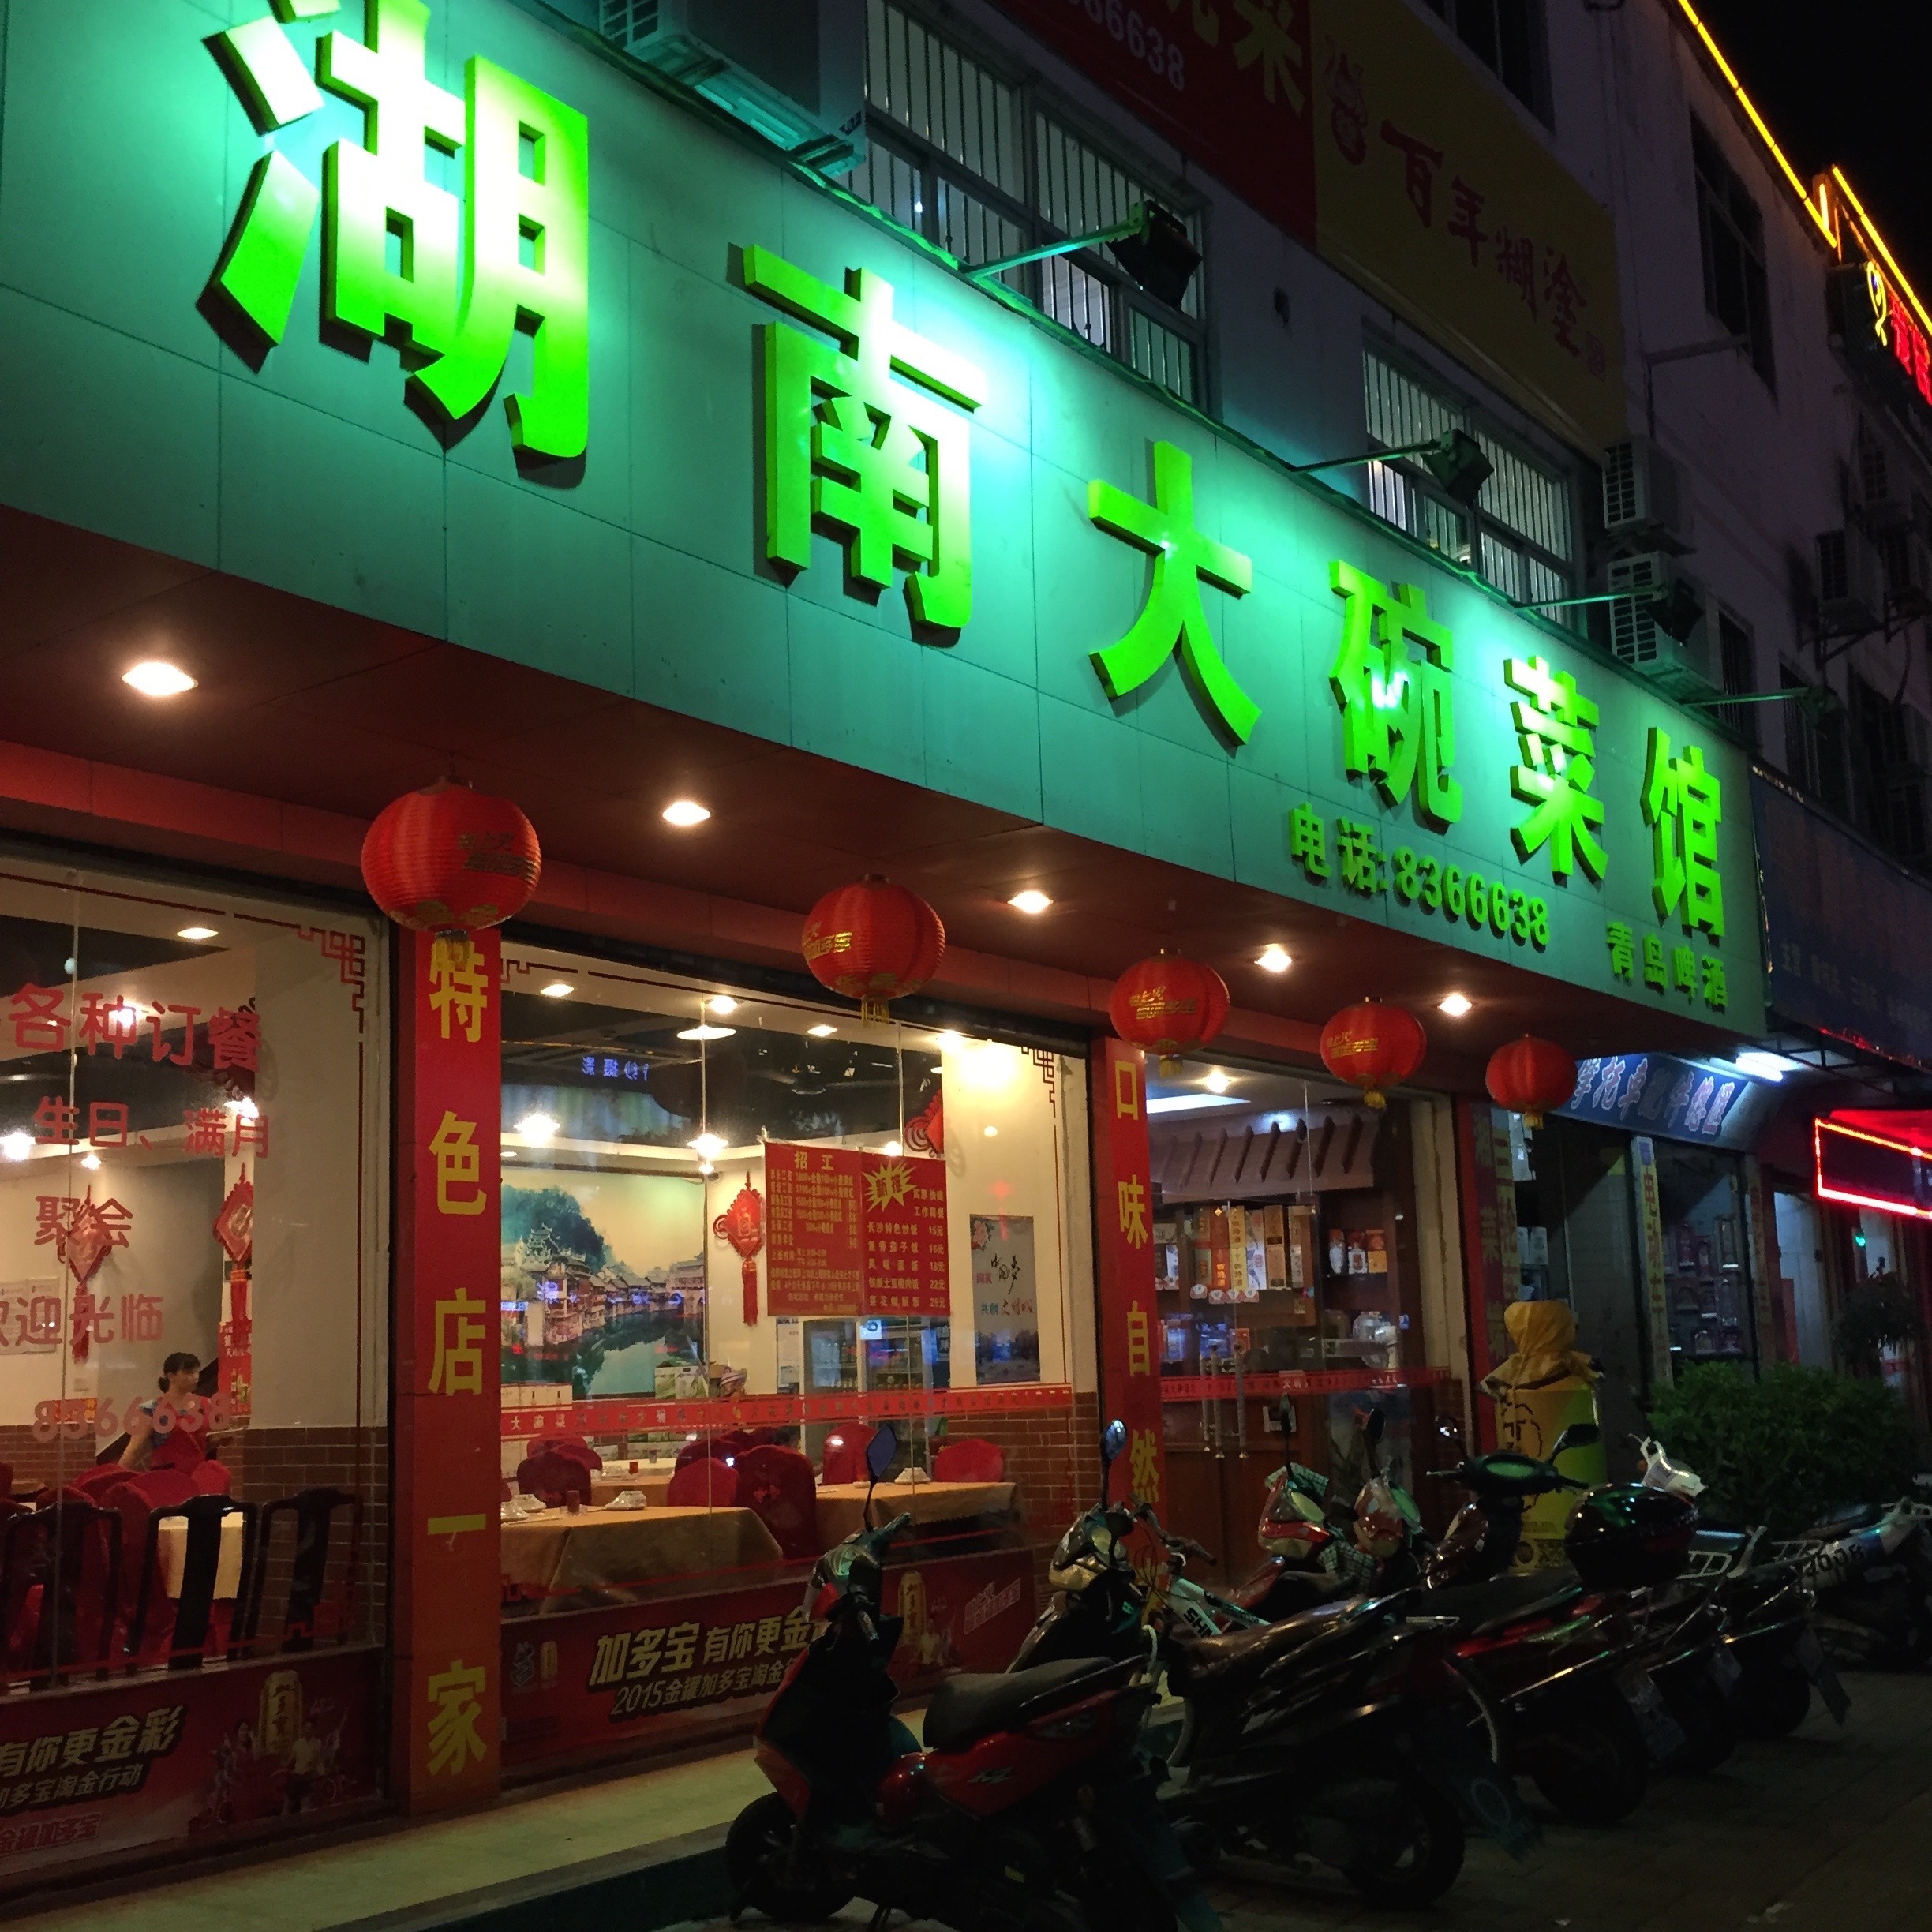  After a busy day we had a wonderful meal in Pingshan. &nbsp;This is where we went for dinner. &nbsp;I have no idea what kind of Chinese food we had here but it was delicious! &nbsp; 